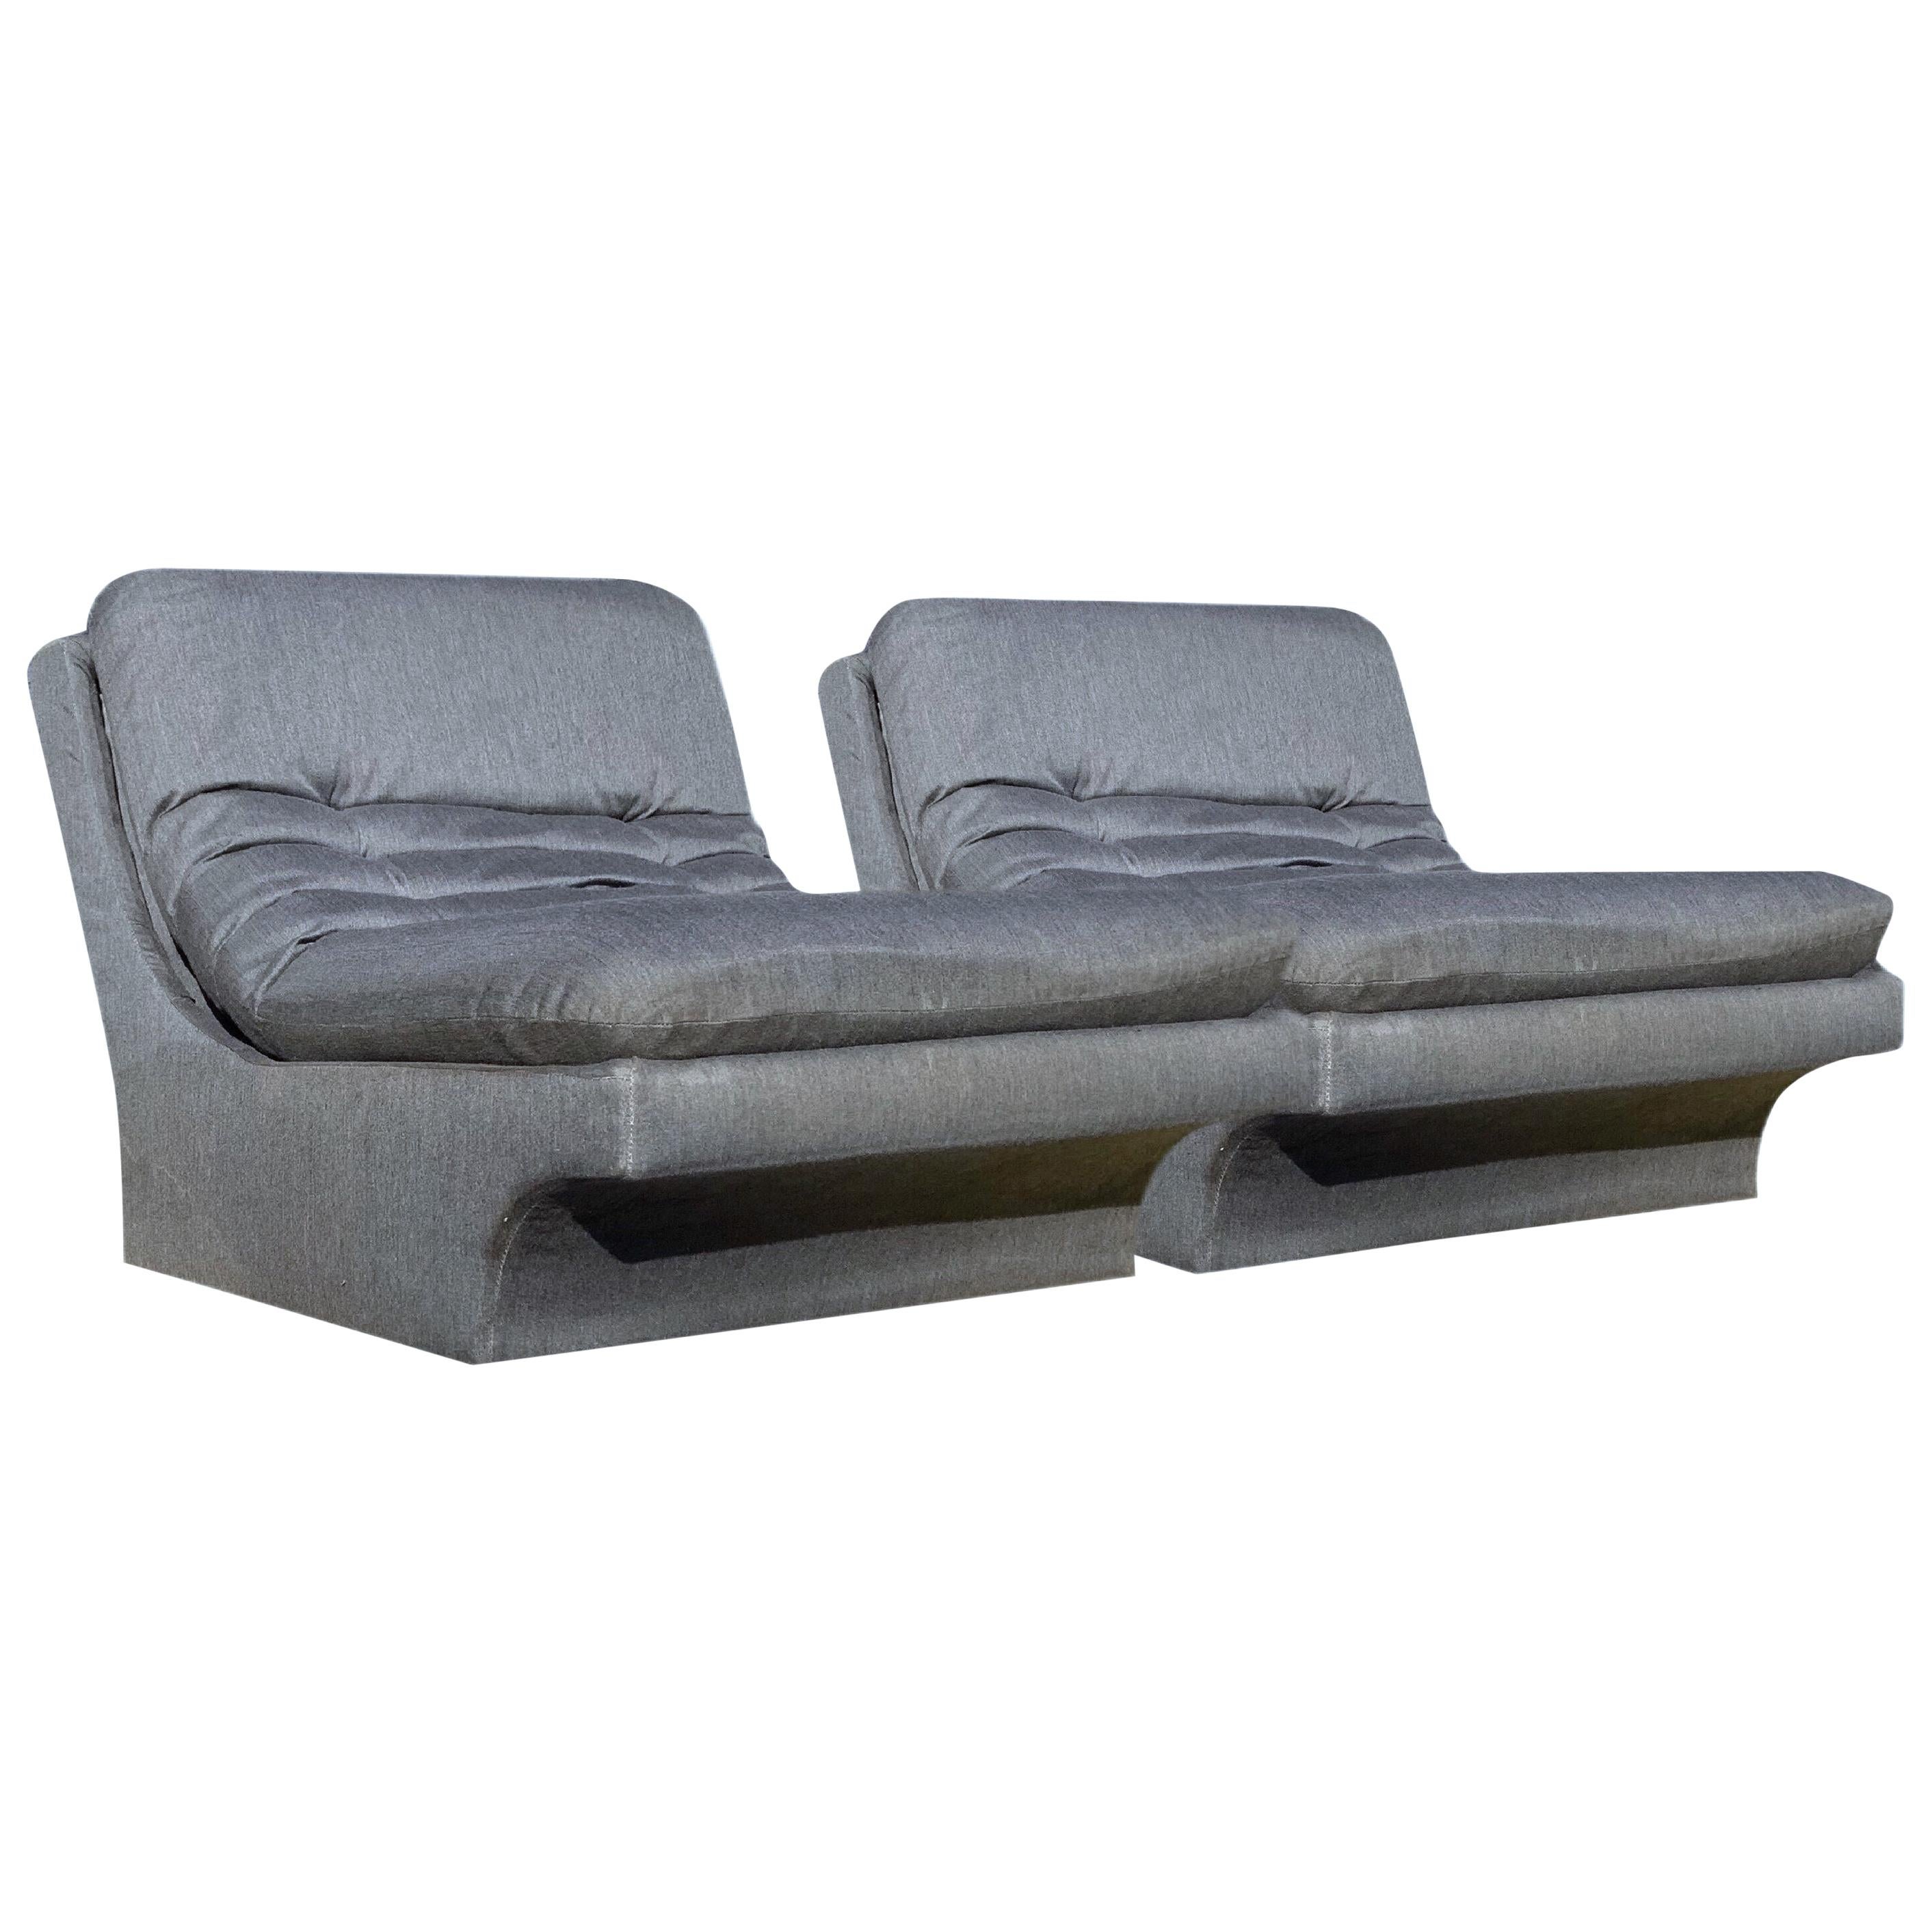 Mid-Century Modular Lounge Chairs Loveseat Preview Furniture Sofa 1970